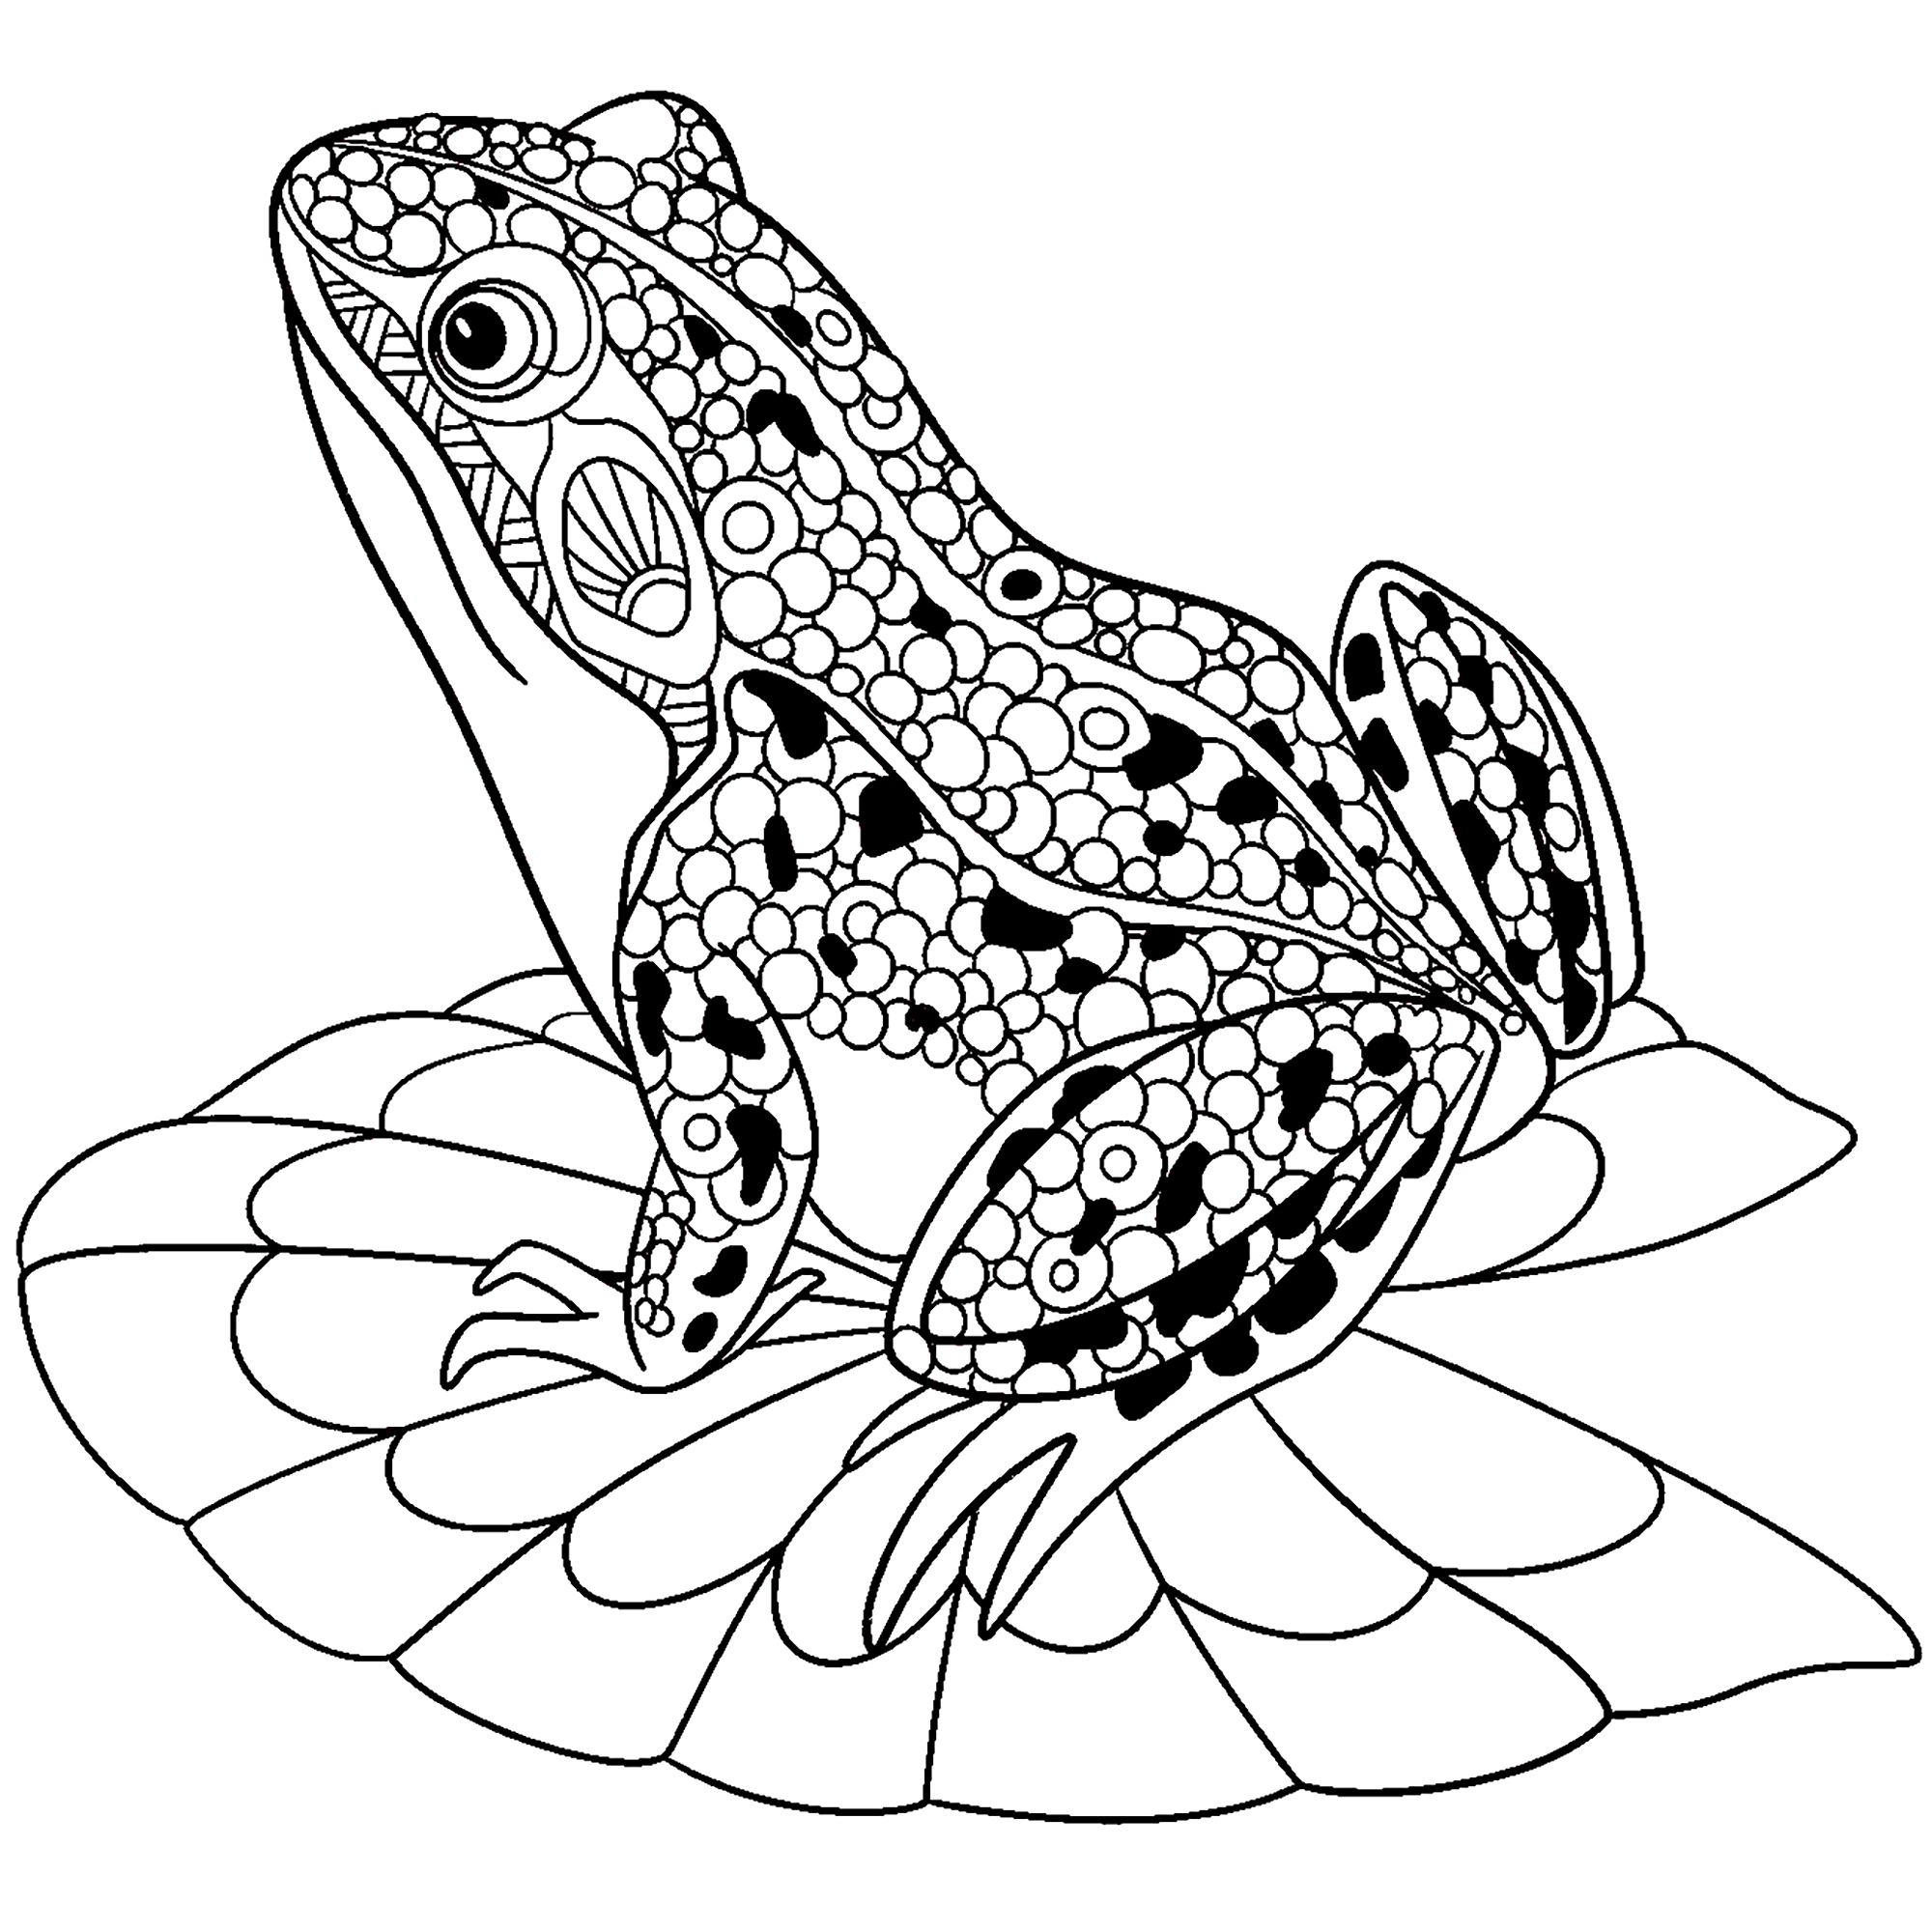 Zentangle stylized cartoon frog, isolated on white background. Sketch for adult antistress coloring page. Hand drawn doodle, zentangle, floral design elements for coloring book.